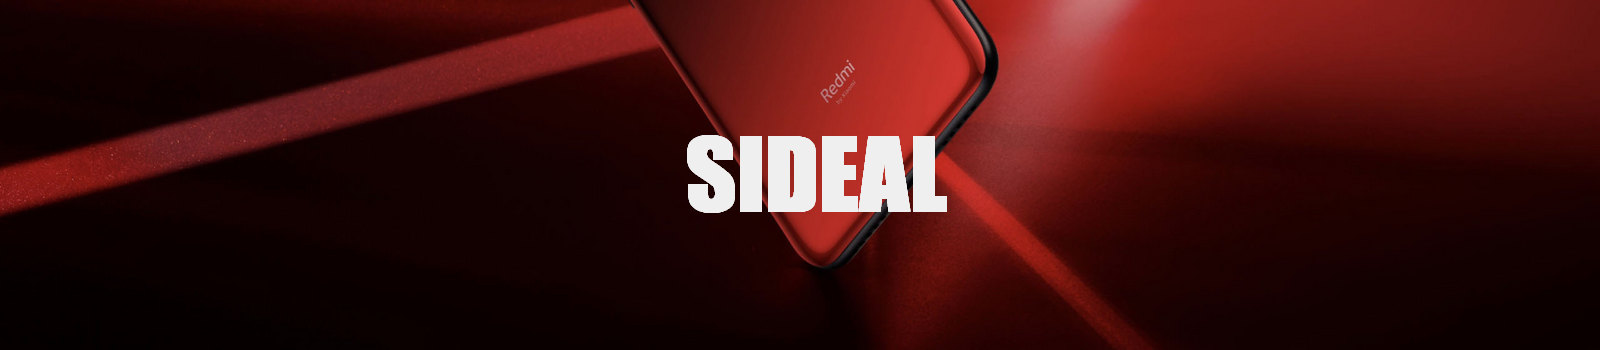 Sideal